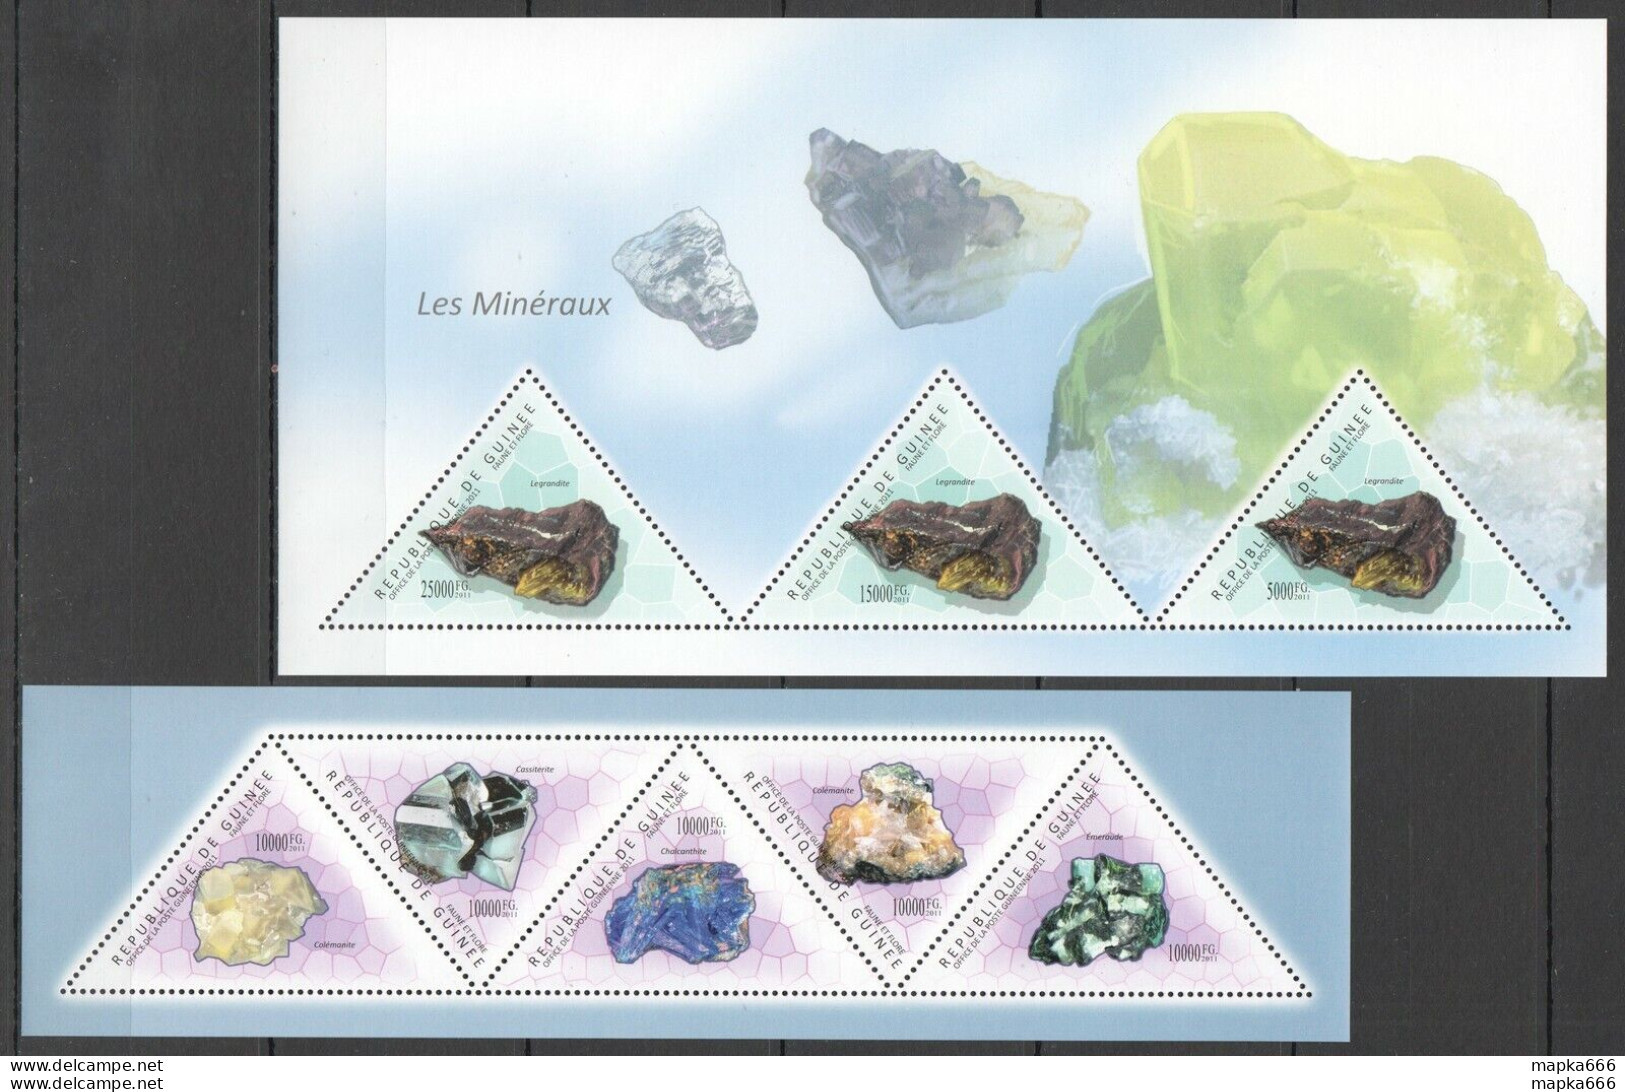 Bc261 2011 Guinea Nature Geology Crystals Minerals Les Mineraux 2Kb Mnh - Minerales